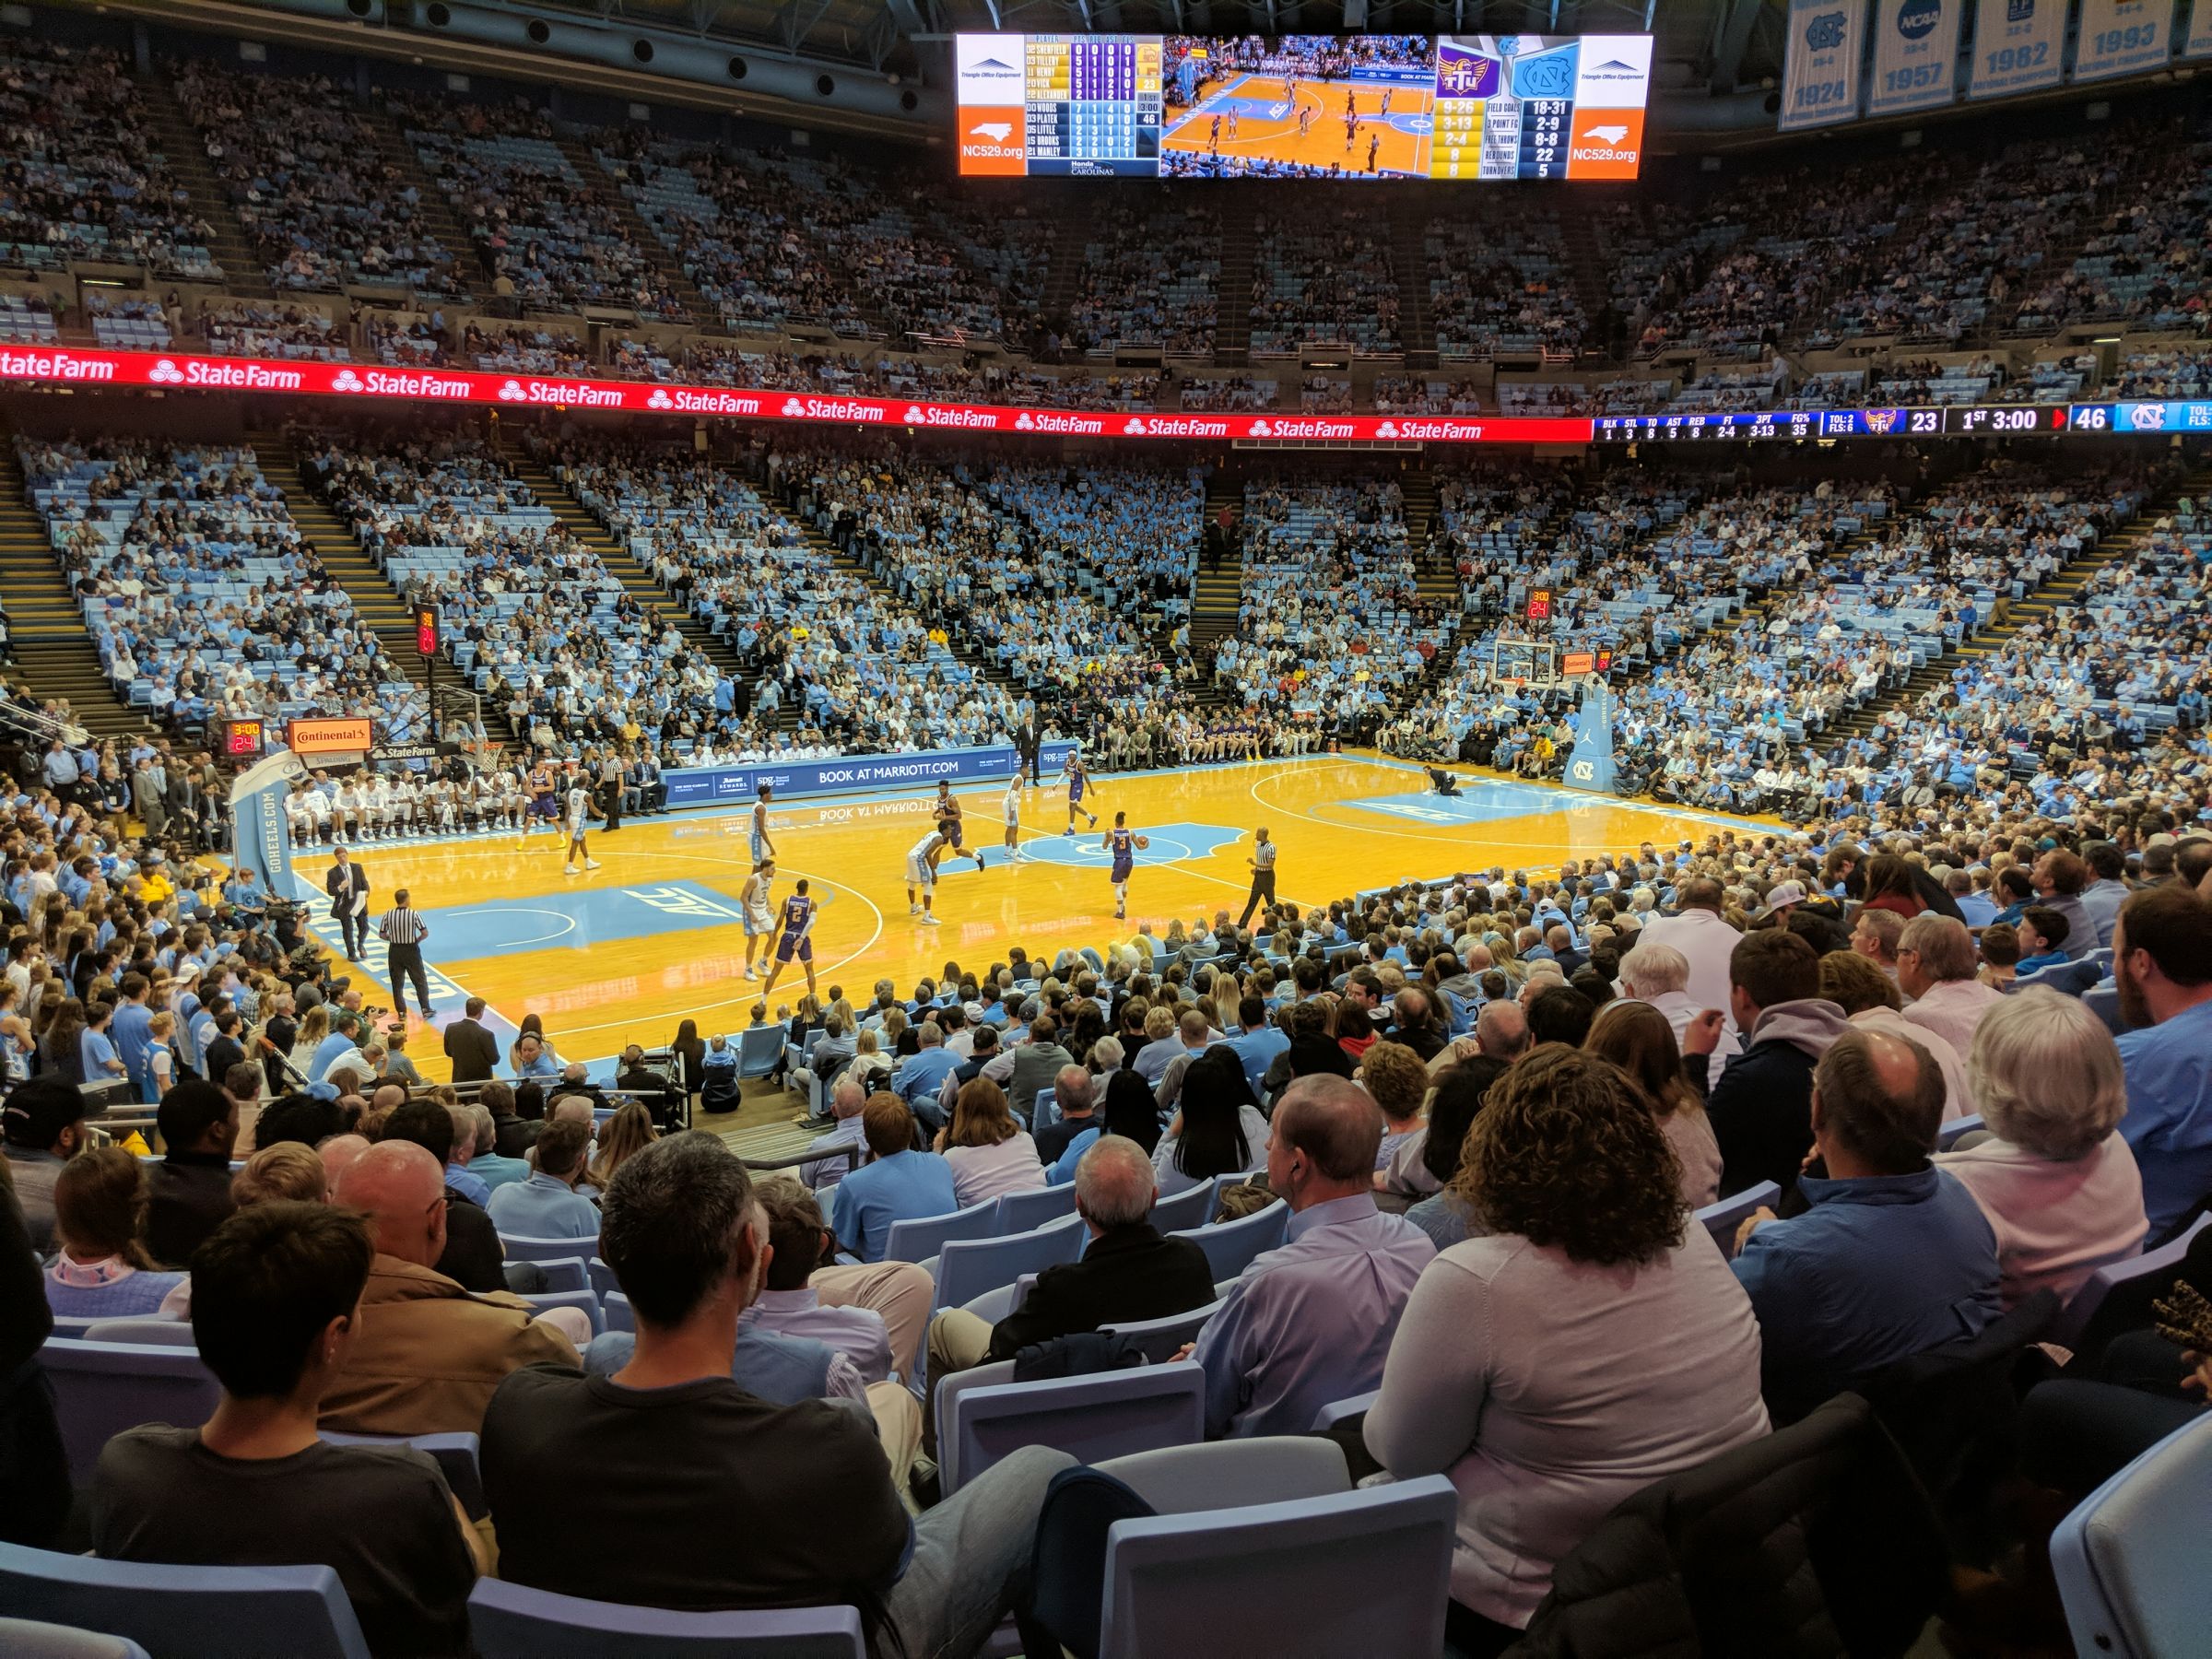 section 122, row v seat view  - dean smith center